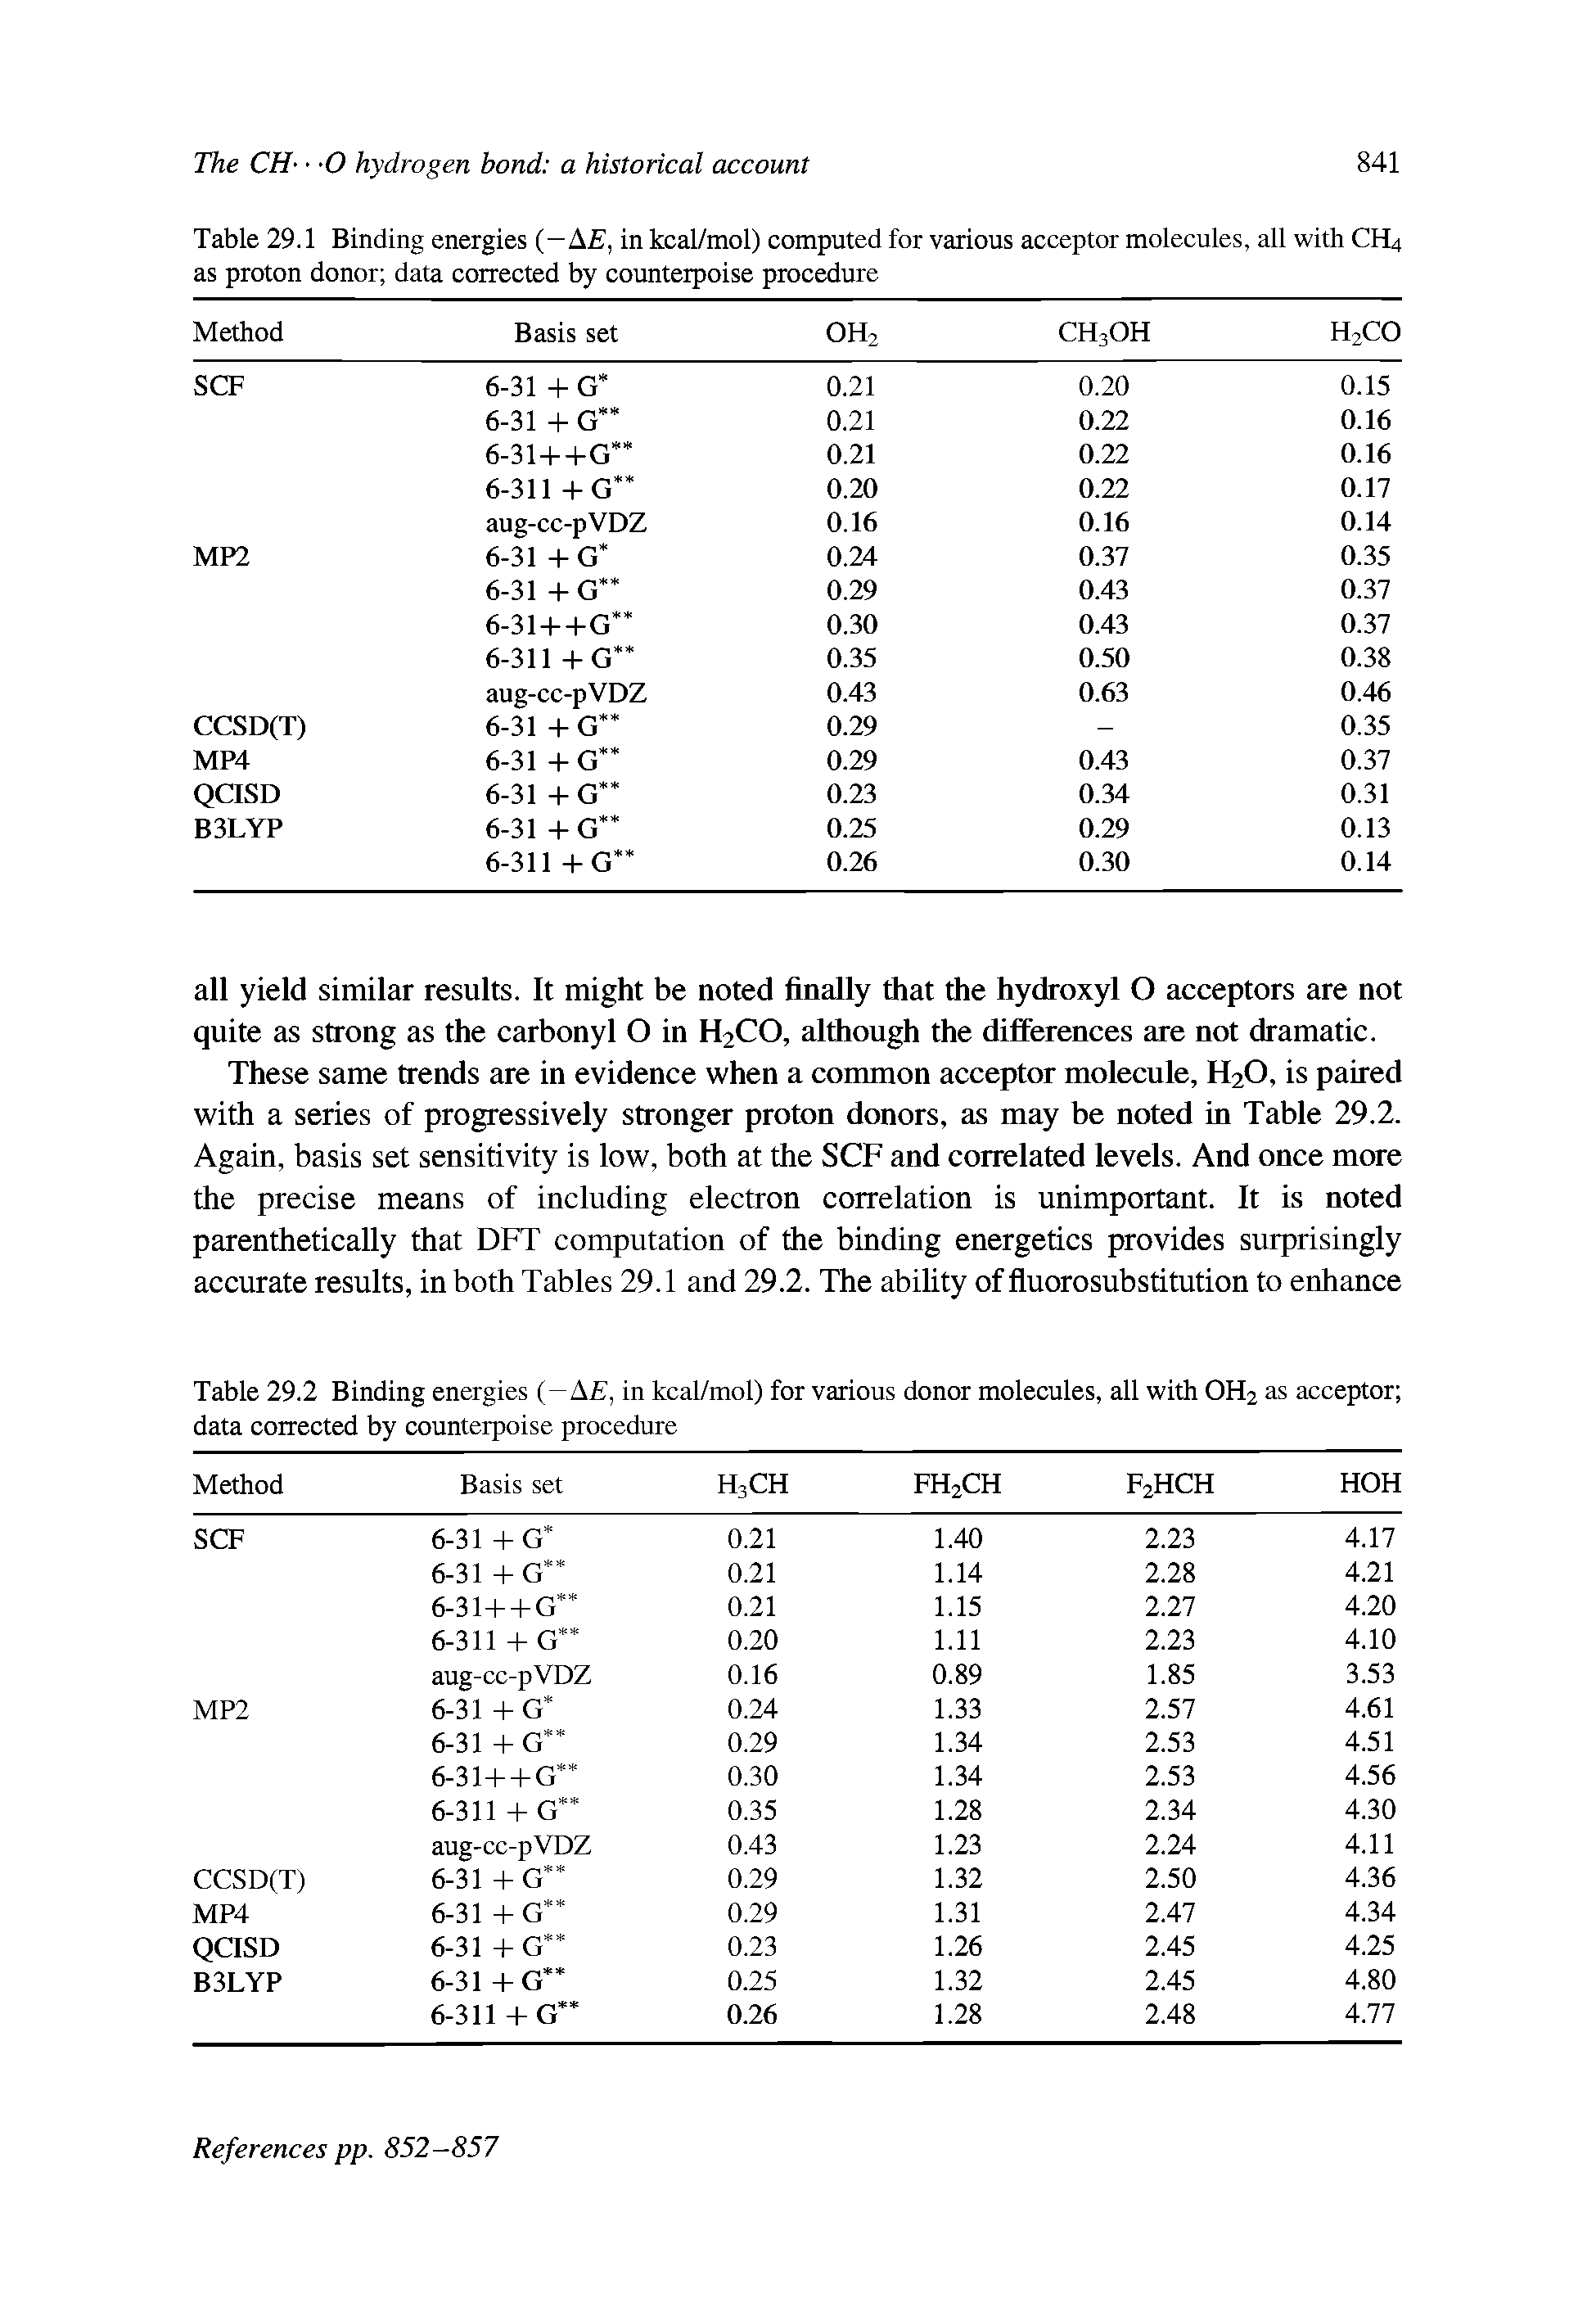 Table 29.1 Binding energies (—A , in kcal/mol) computed for various acceptor molecules, all with CH4 as proton donor data corrected by counterpoise procedure...